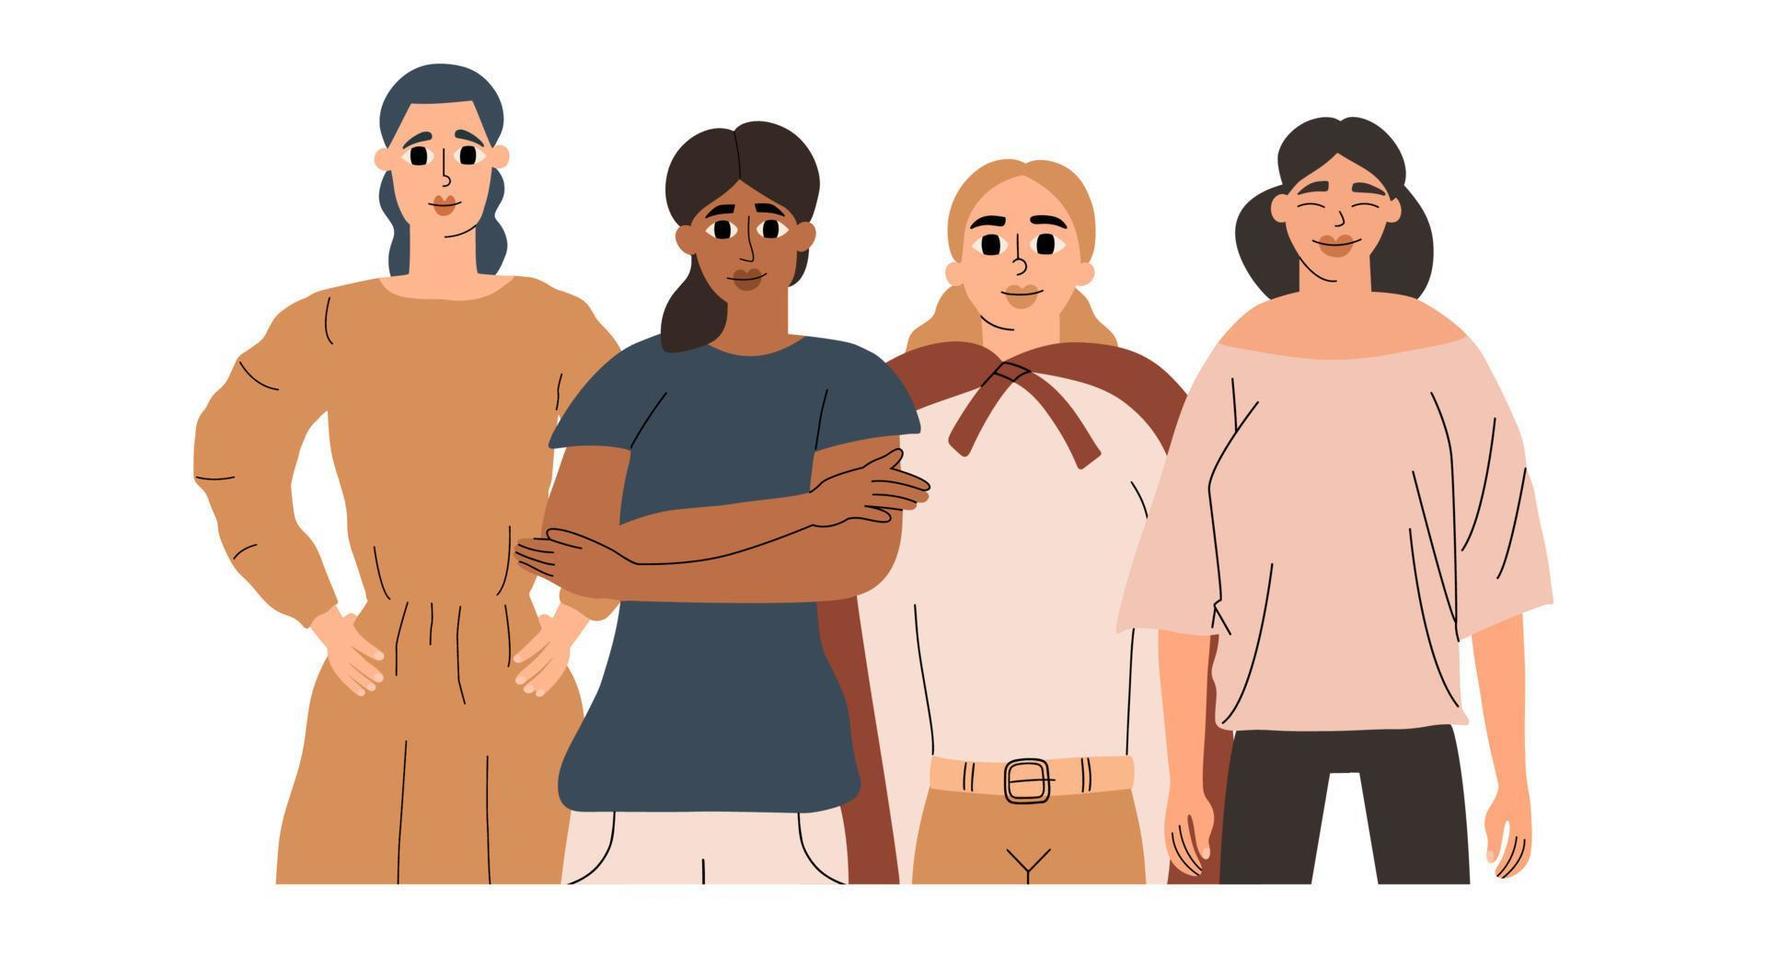 Women's History Month. Vector illustration in hand drawn style